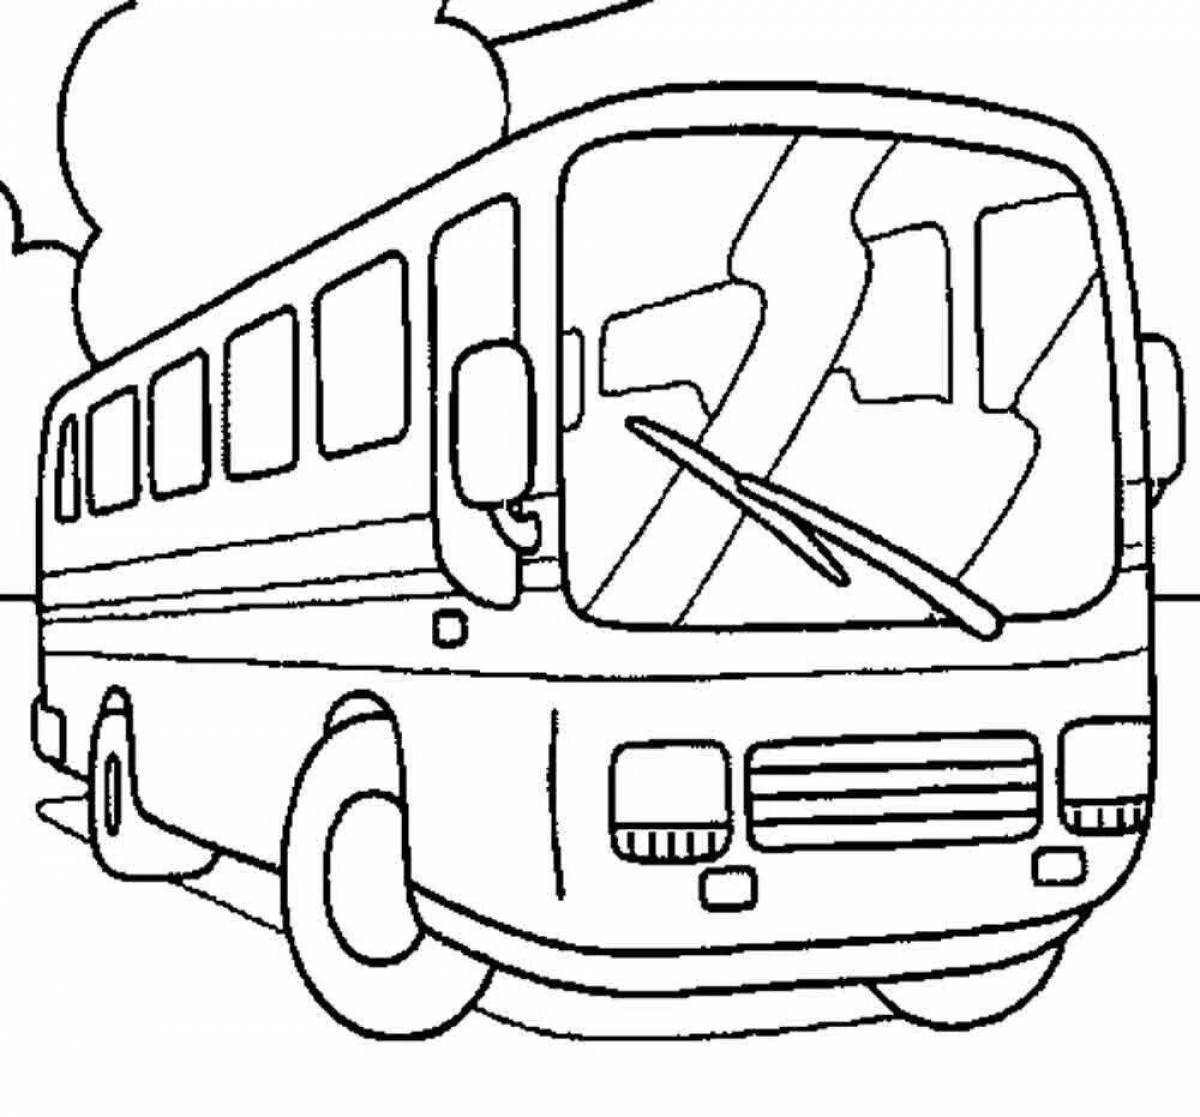 Colorful public transport coloring page